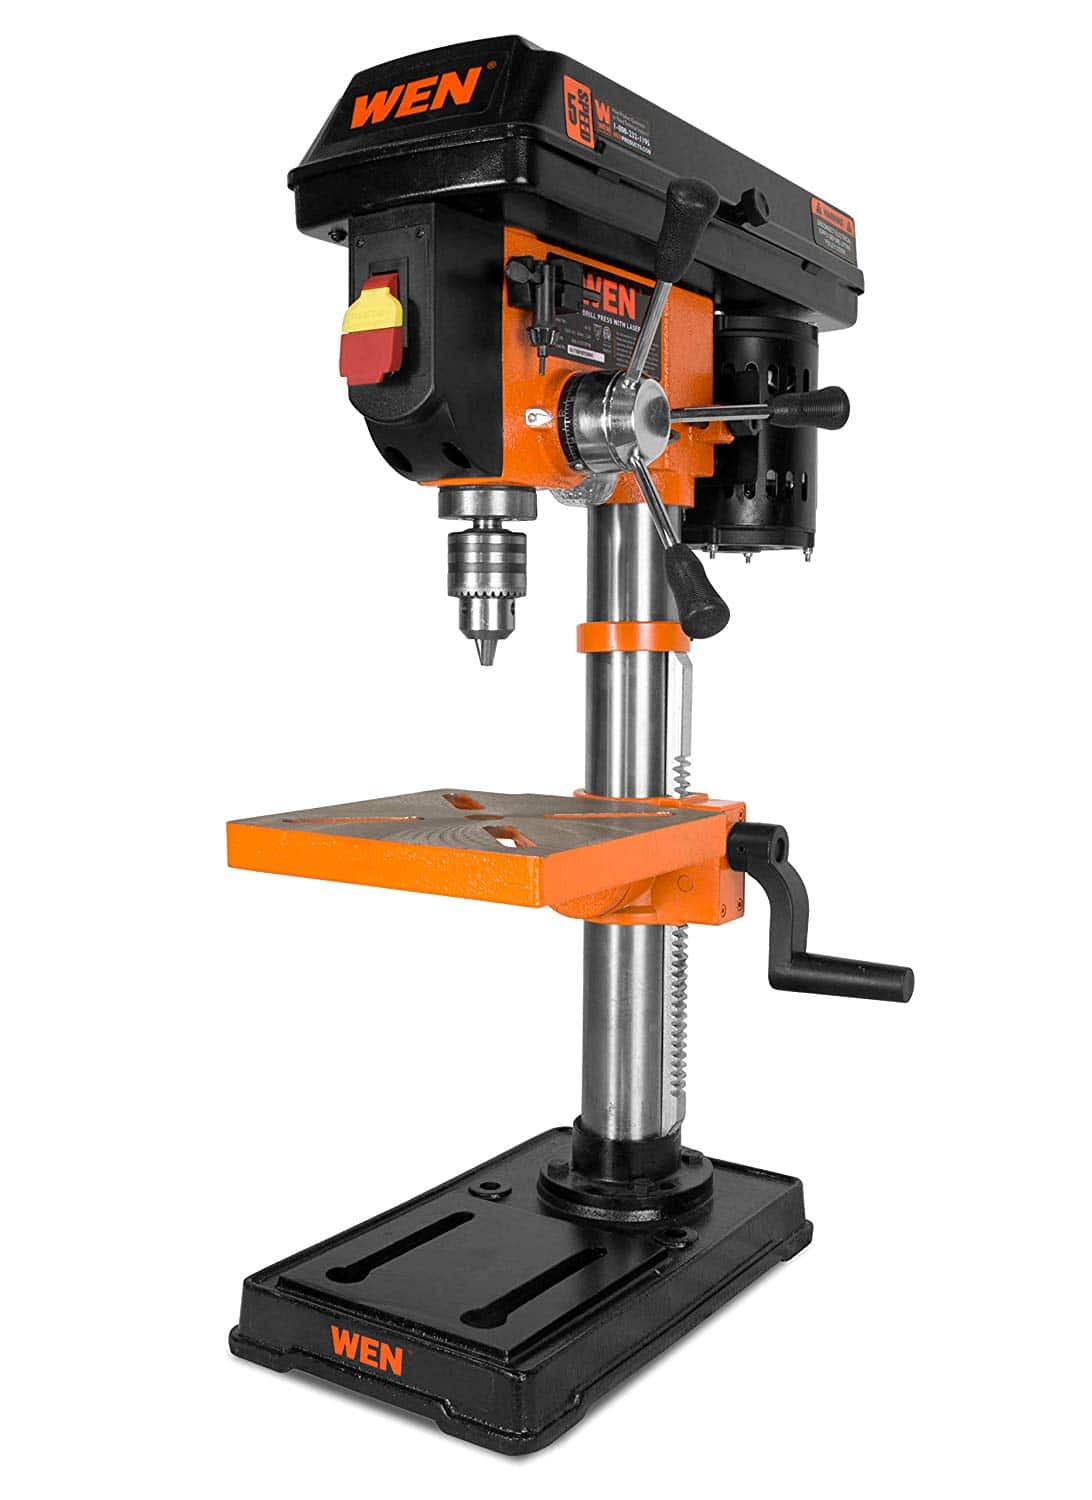 WEN 4210T Drill Press with Laser